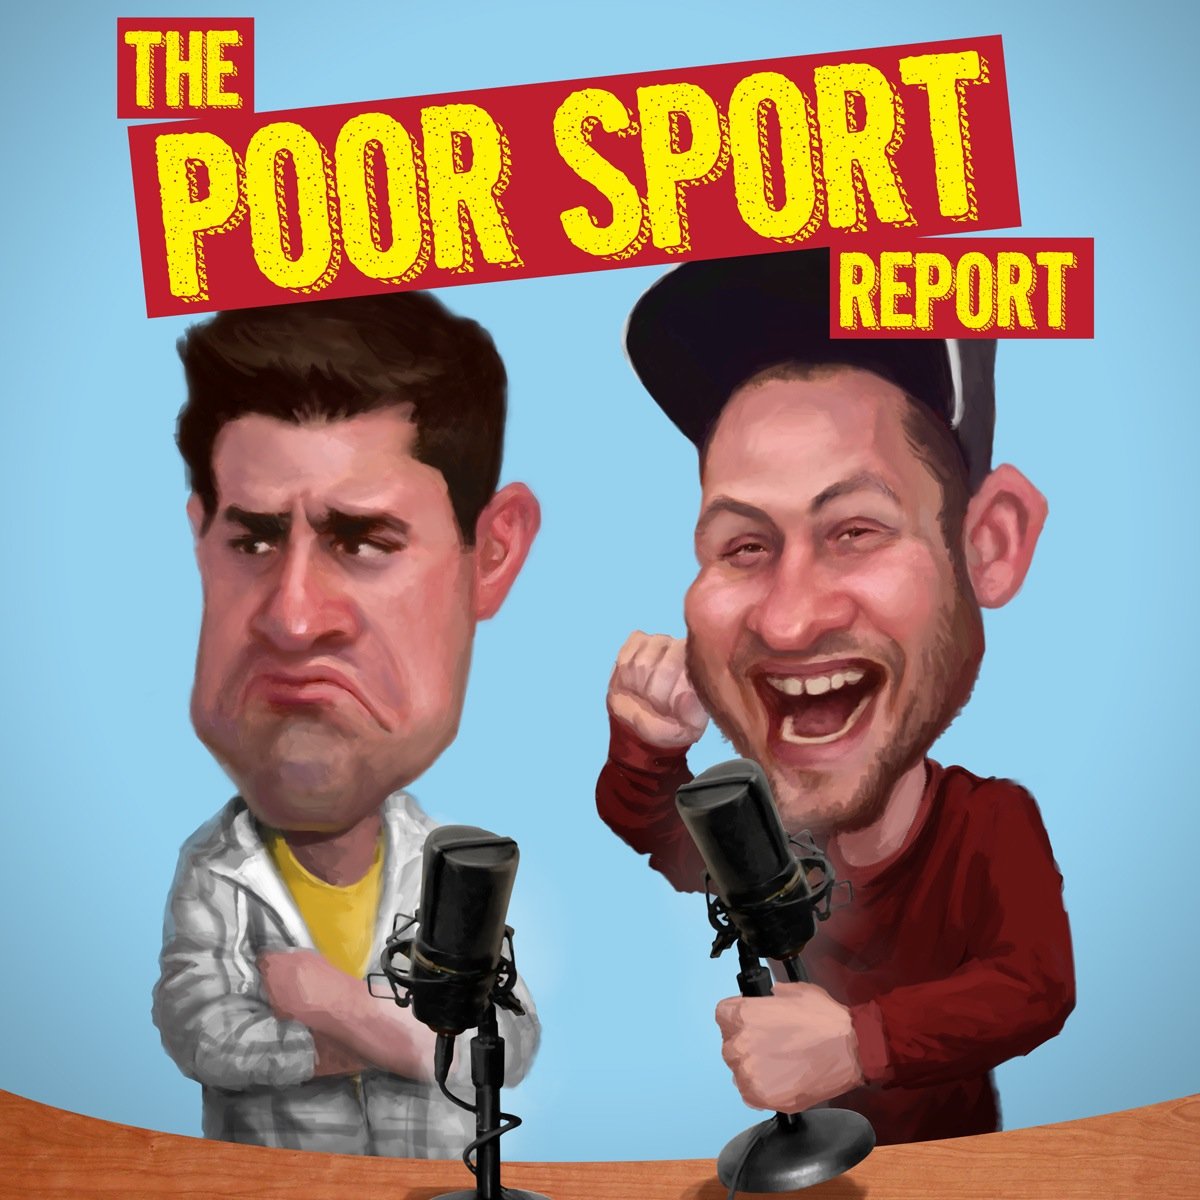 The PoorSport Report